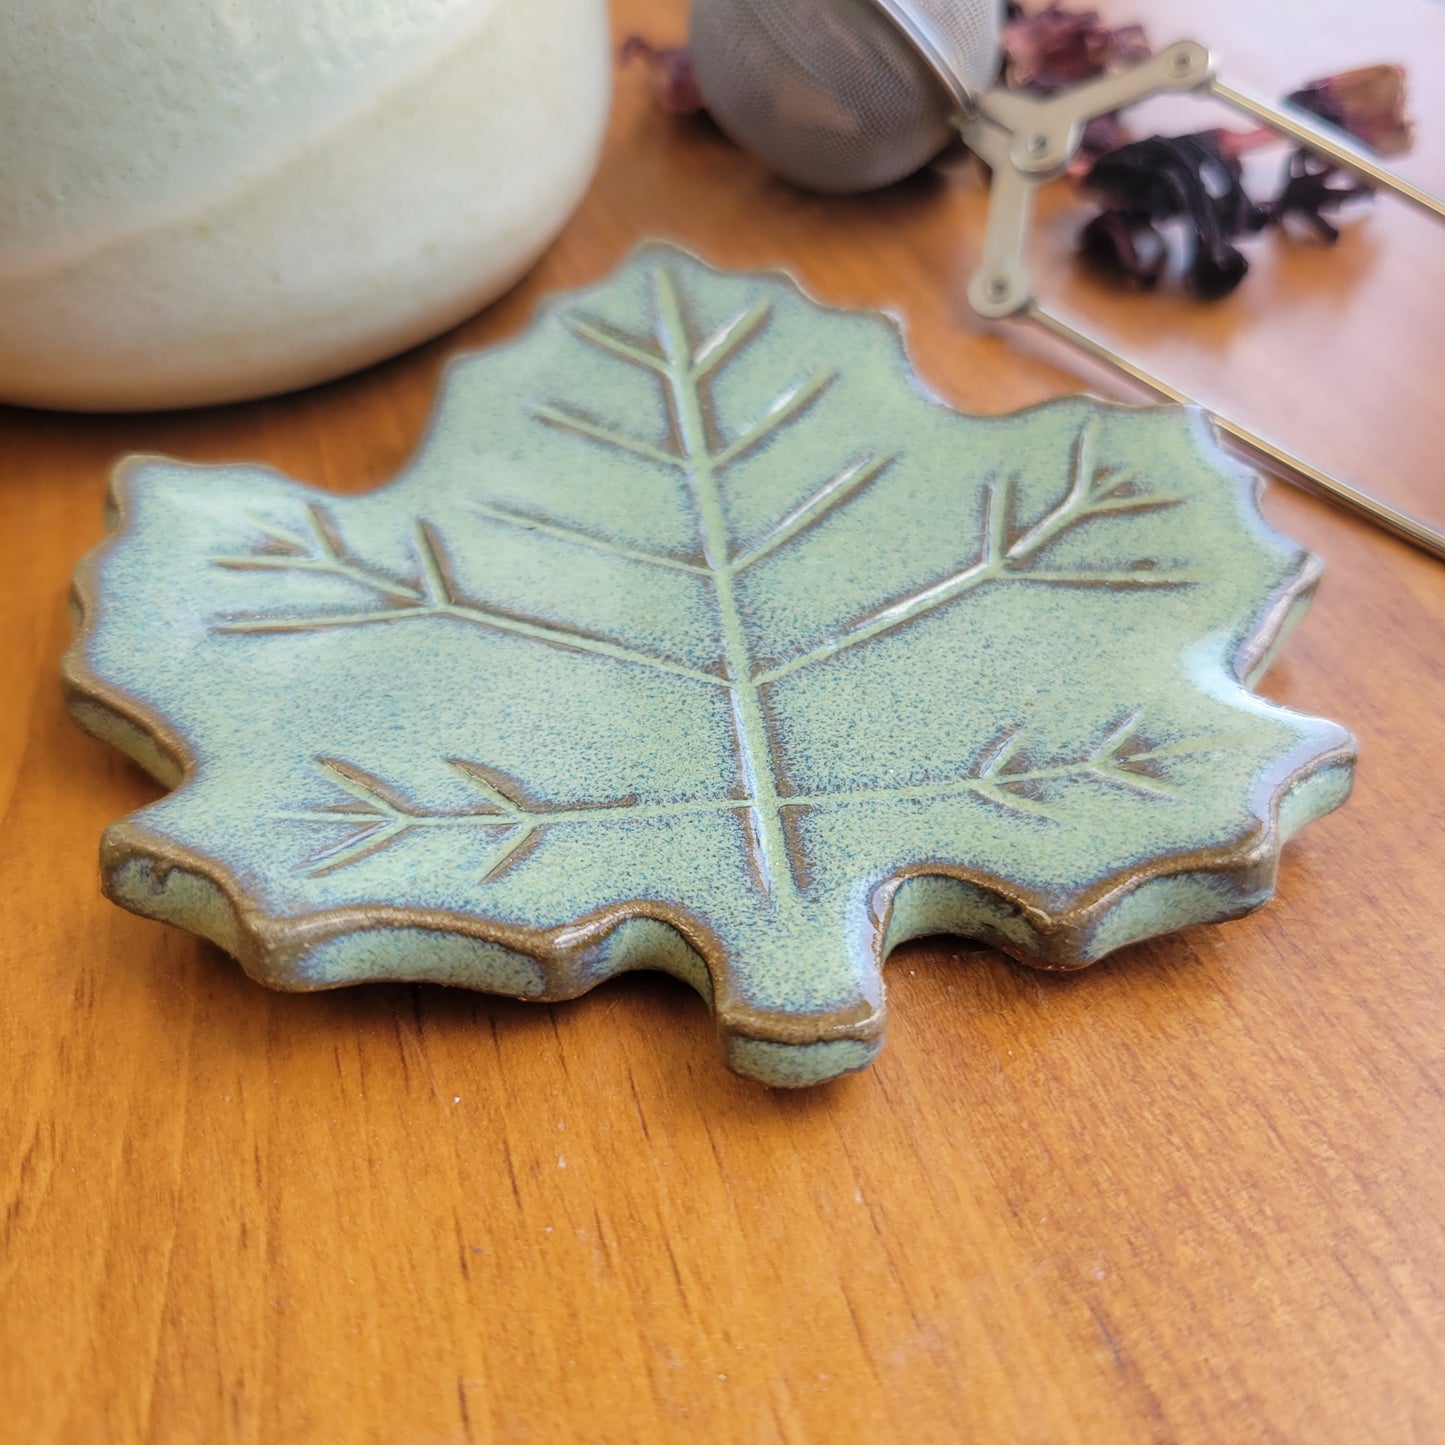 Maple Leaf Mini Spoon Rest for Coffee Station Green